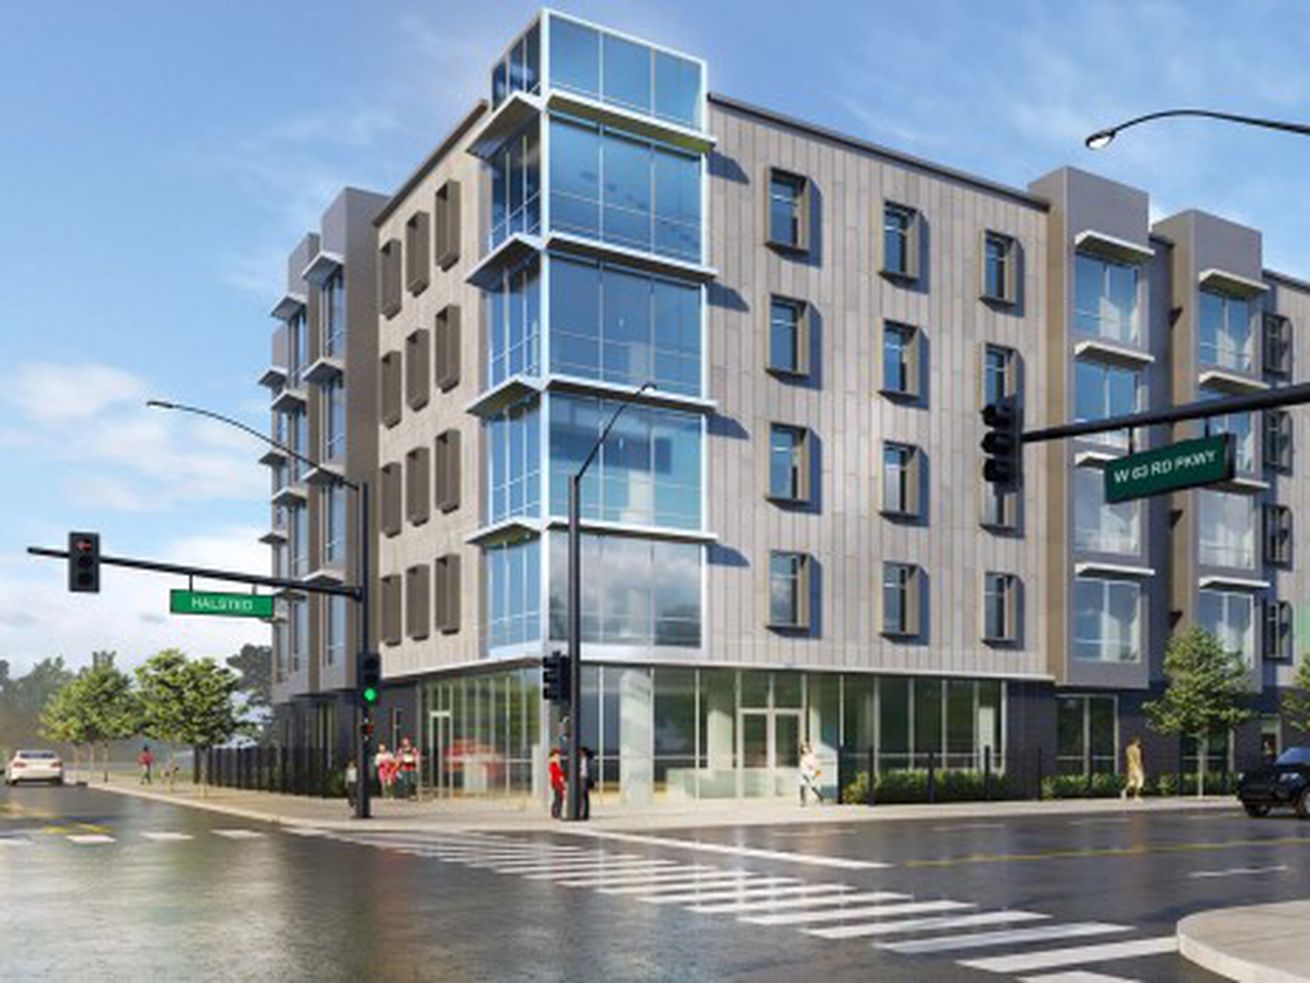 A rendering of the proposed 56-unit building at Halsted Street and 63rd Parkway.